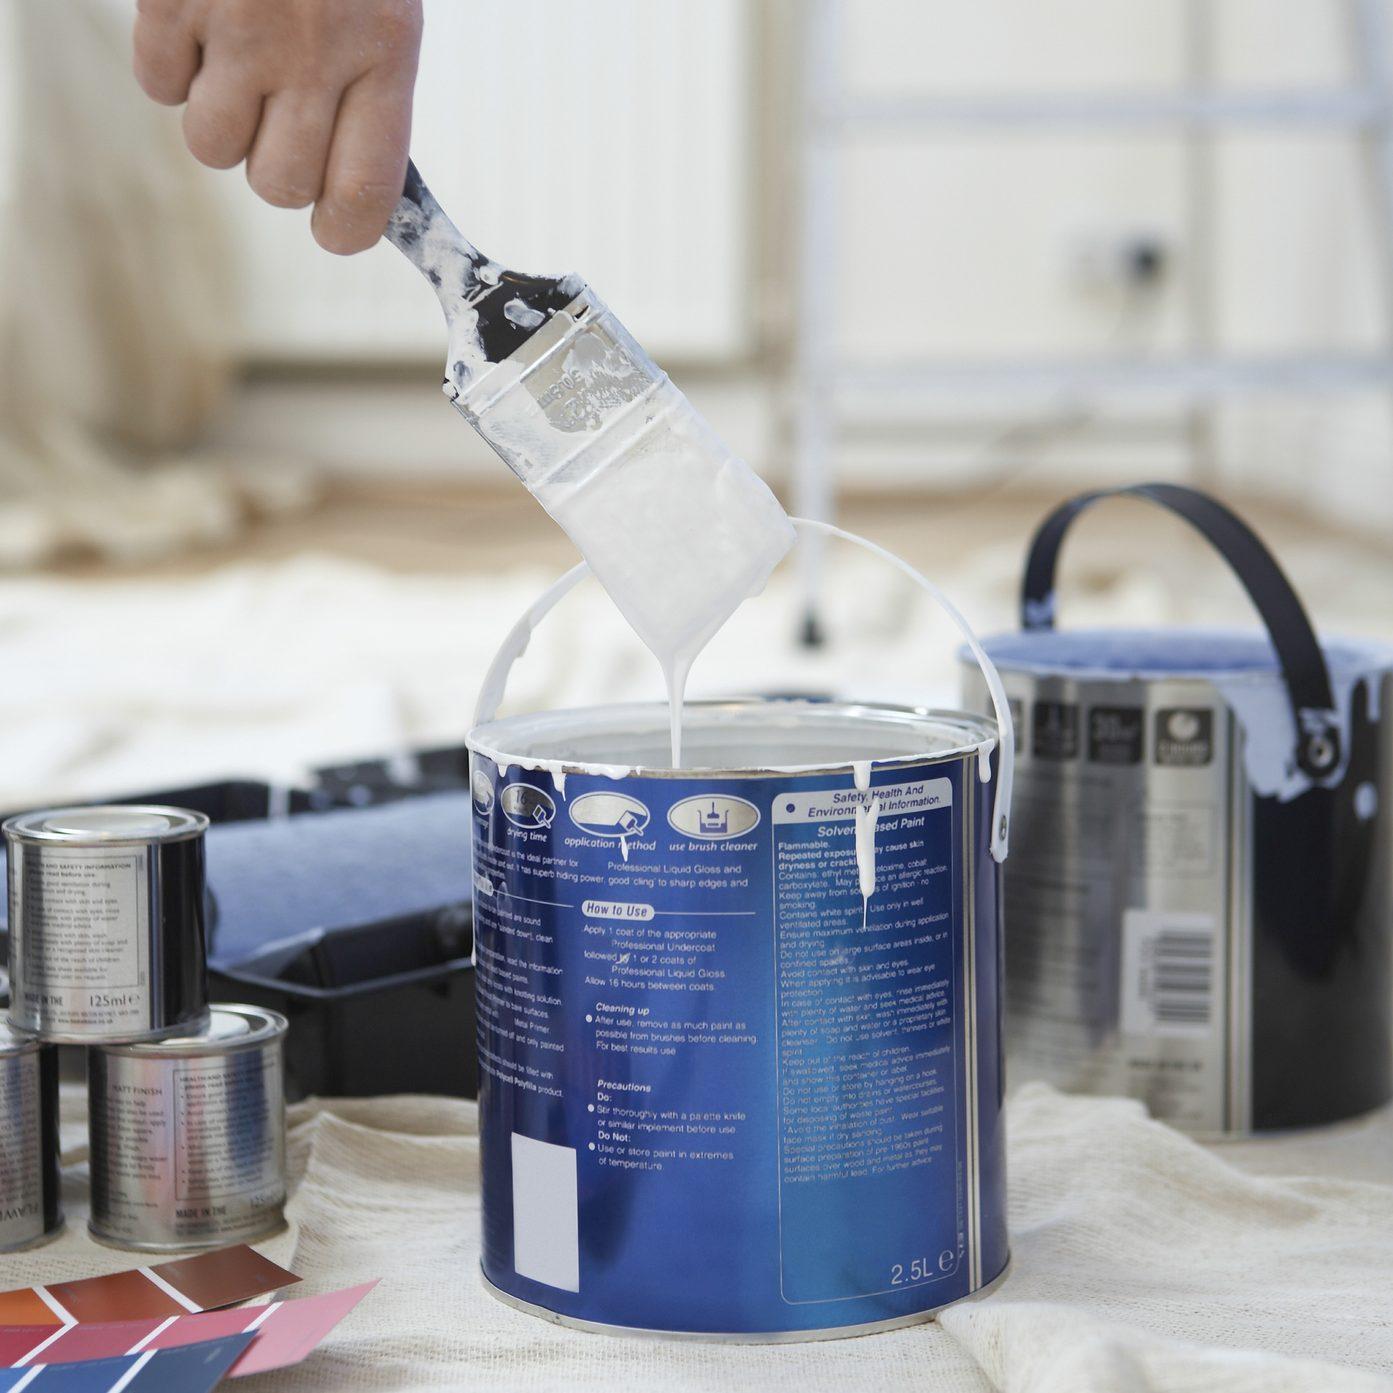 Low VOC vs. Odorless Paint: How each can affect your property - Learn About  Paint Types